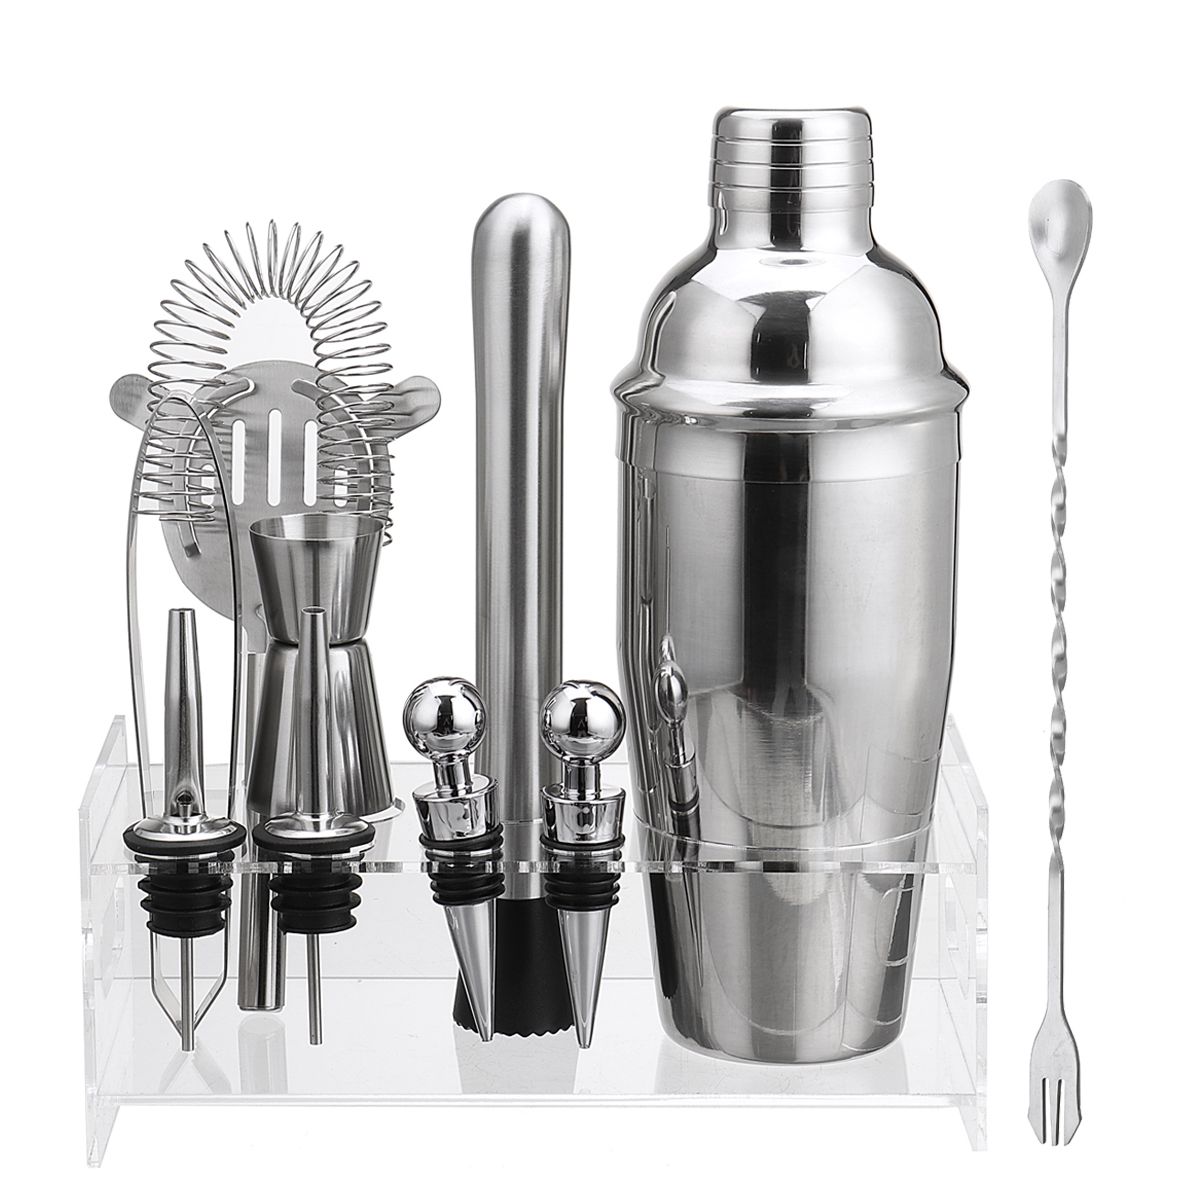 Stainless-Steel-Cocktail-Shaker-Set-11-Piece-Kit-Set-For-Pub-Bar-Home-Party-Tool-1707579